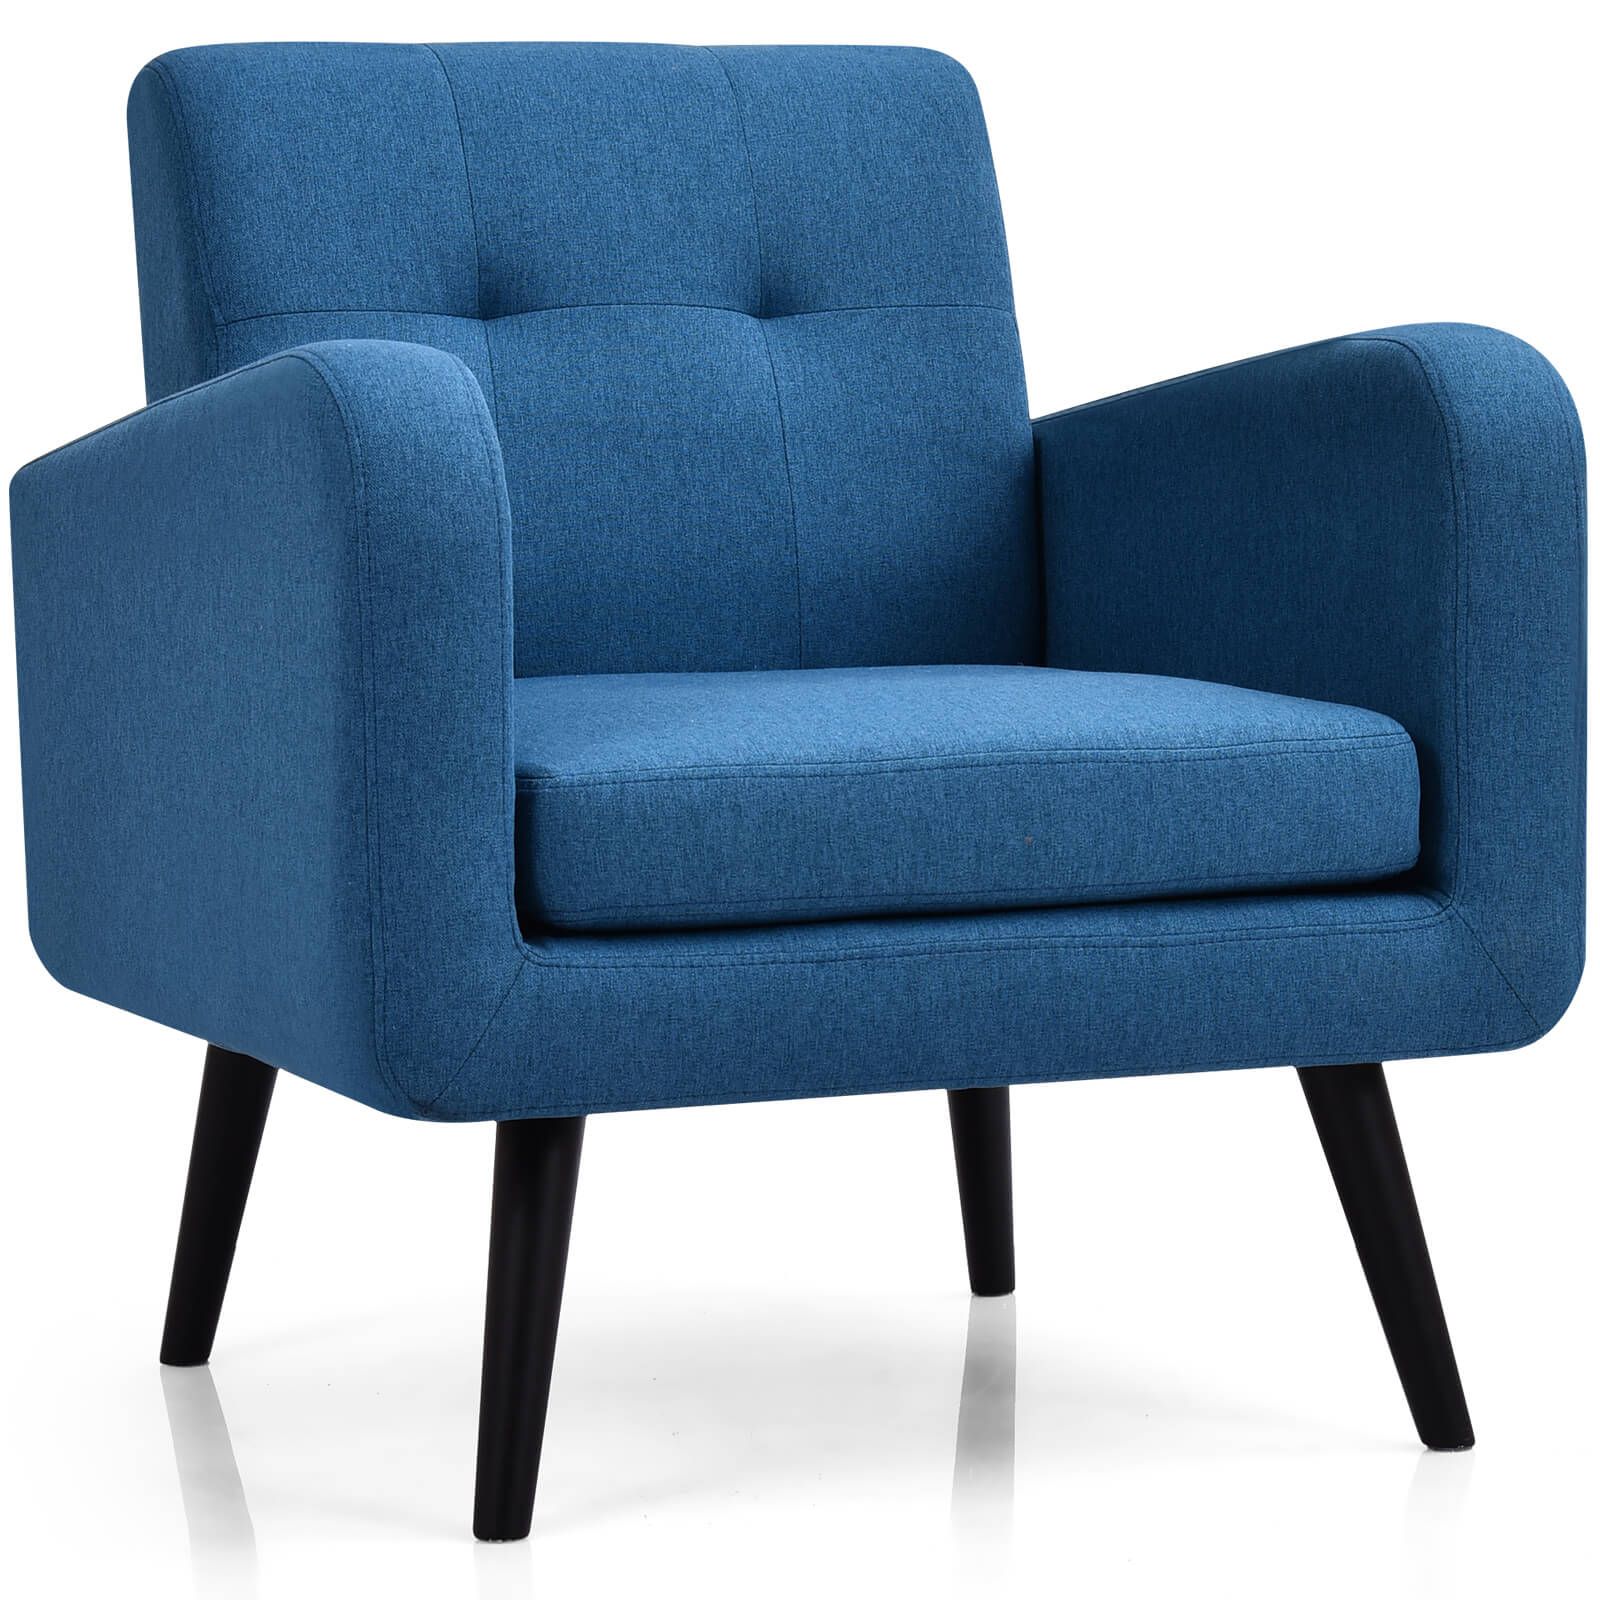 Mid-Century Modern Upholstered Accent Chair with Rubber Wood Legs - Blue